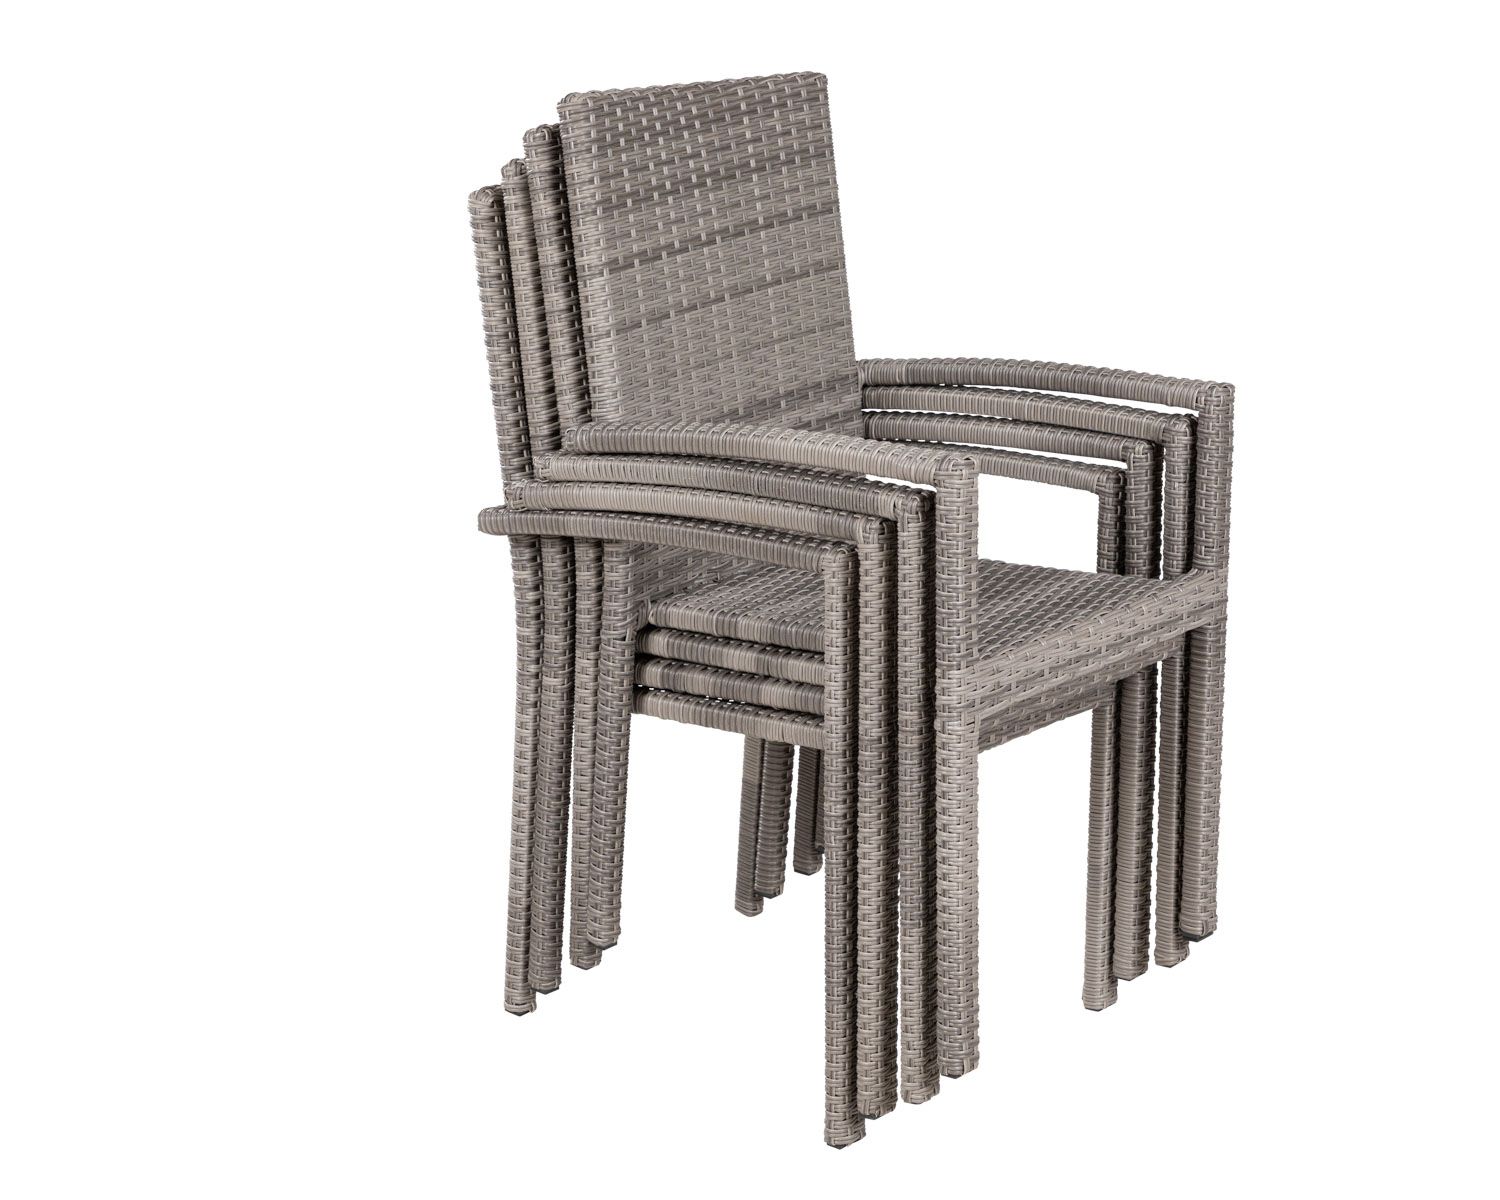 Rio 6 Stackable Chairs And Rectangular Dining Table In Grey | Rattan Direct With Regard To Distressed Gray Wicker Patio Dining Sets (View 4 of 15)